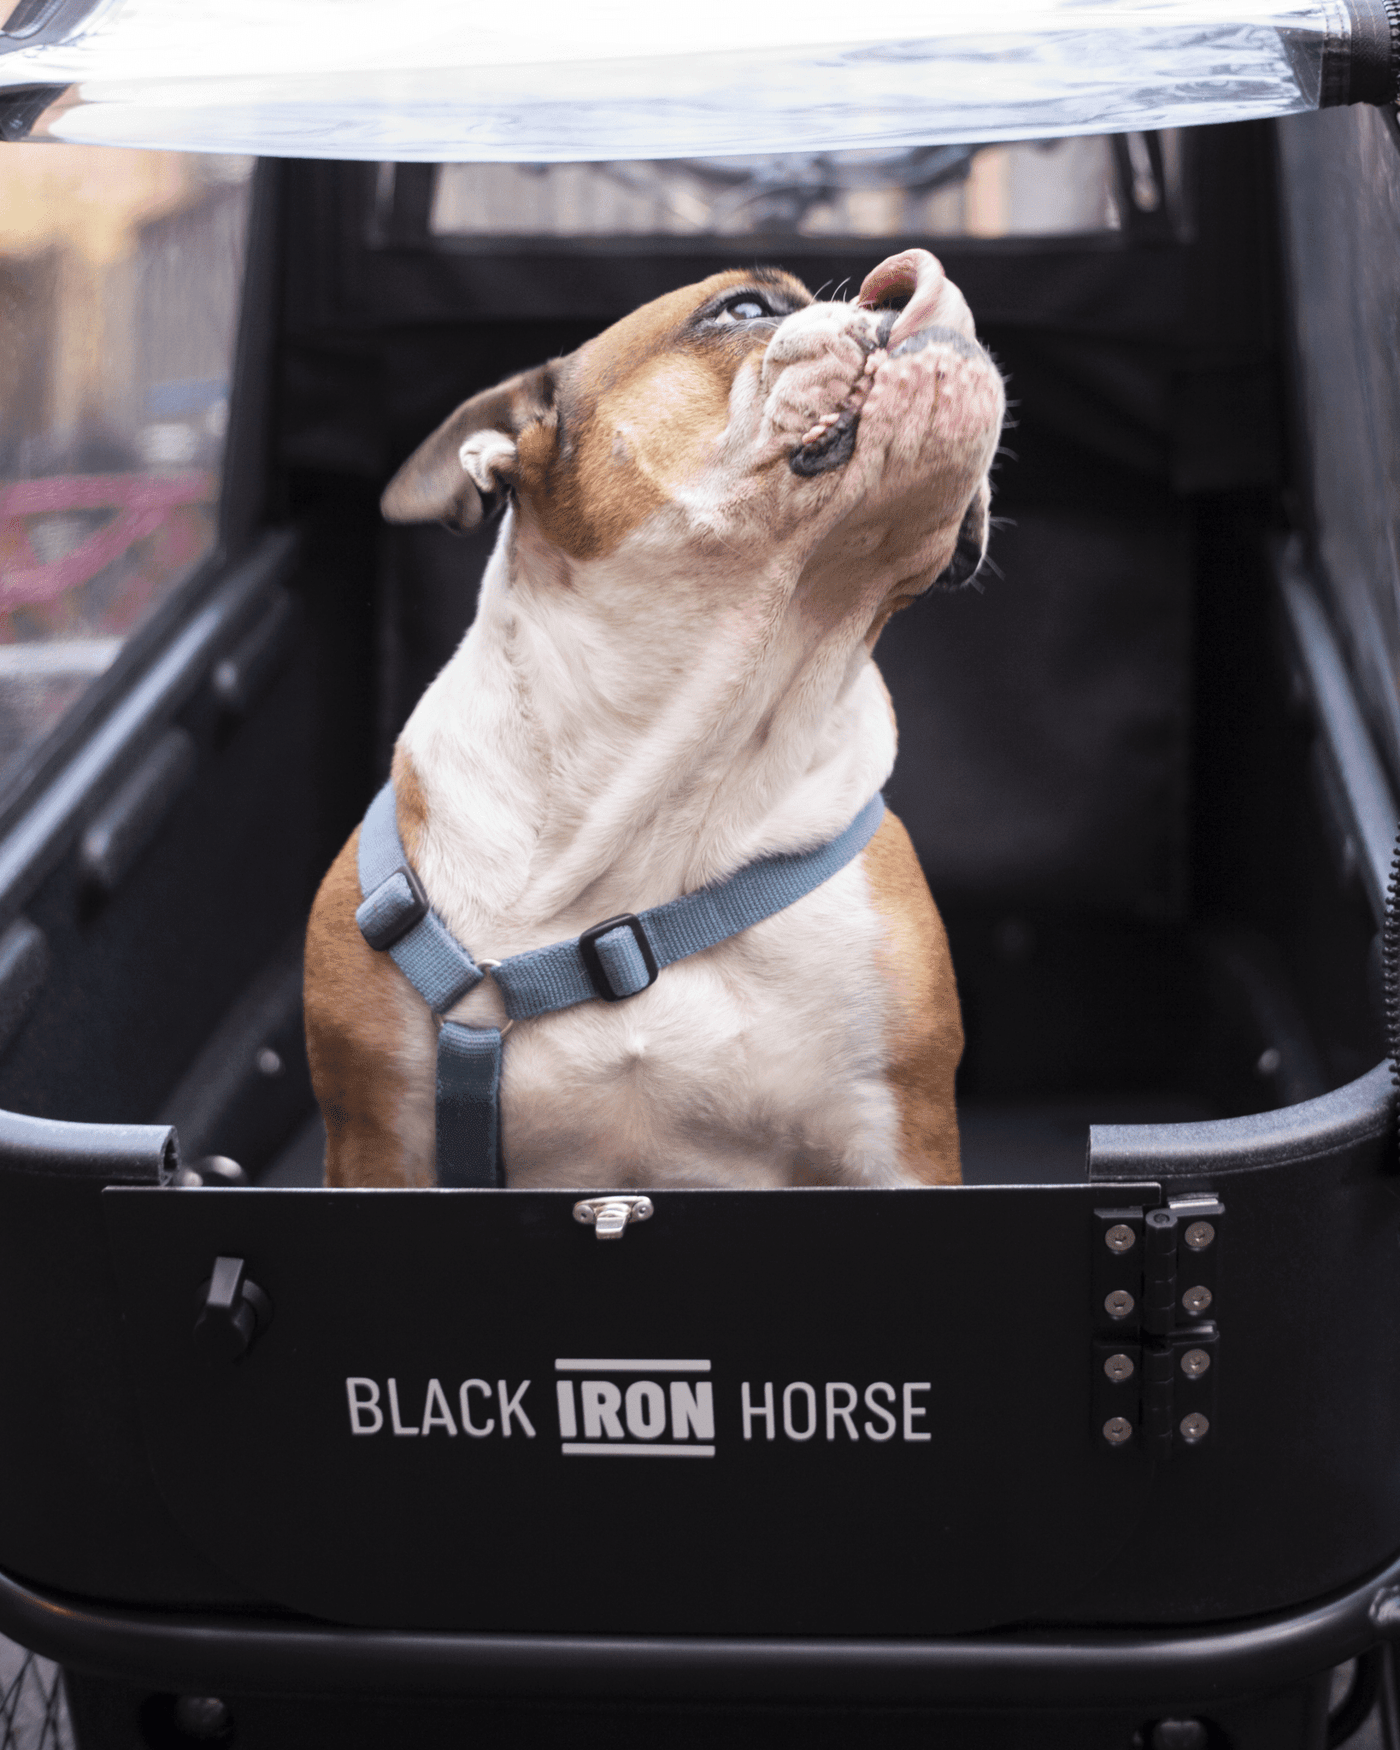 Black Iron Horse - Pony Dog (Shimano EP8 504Wh) - Available Now!